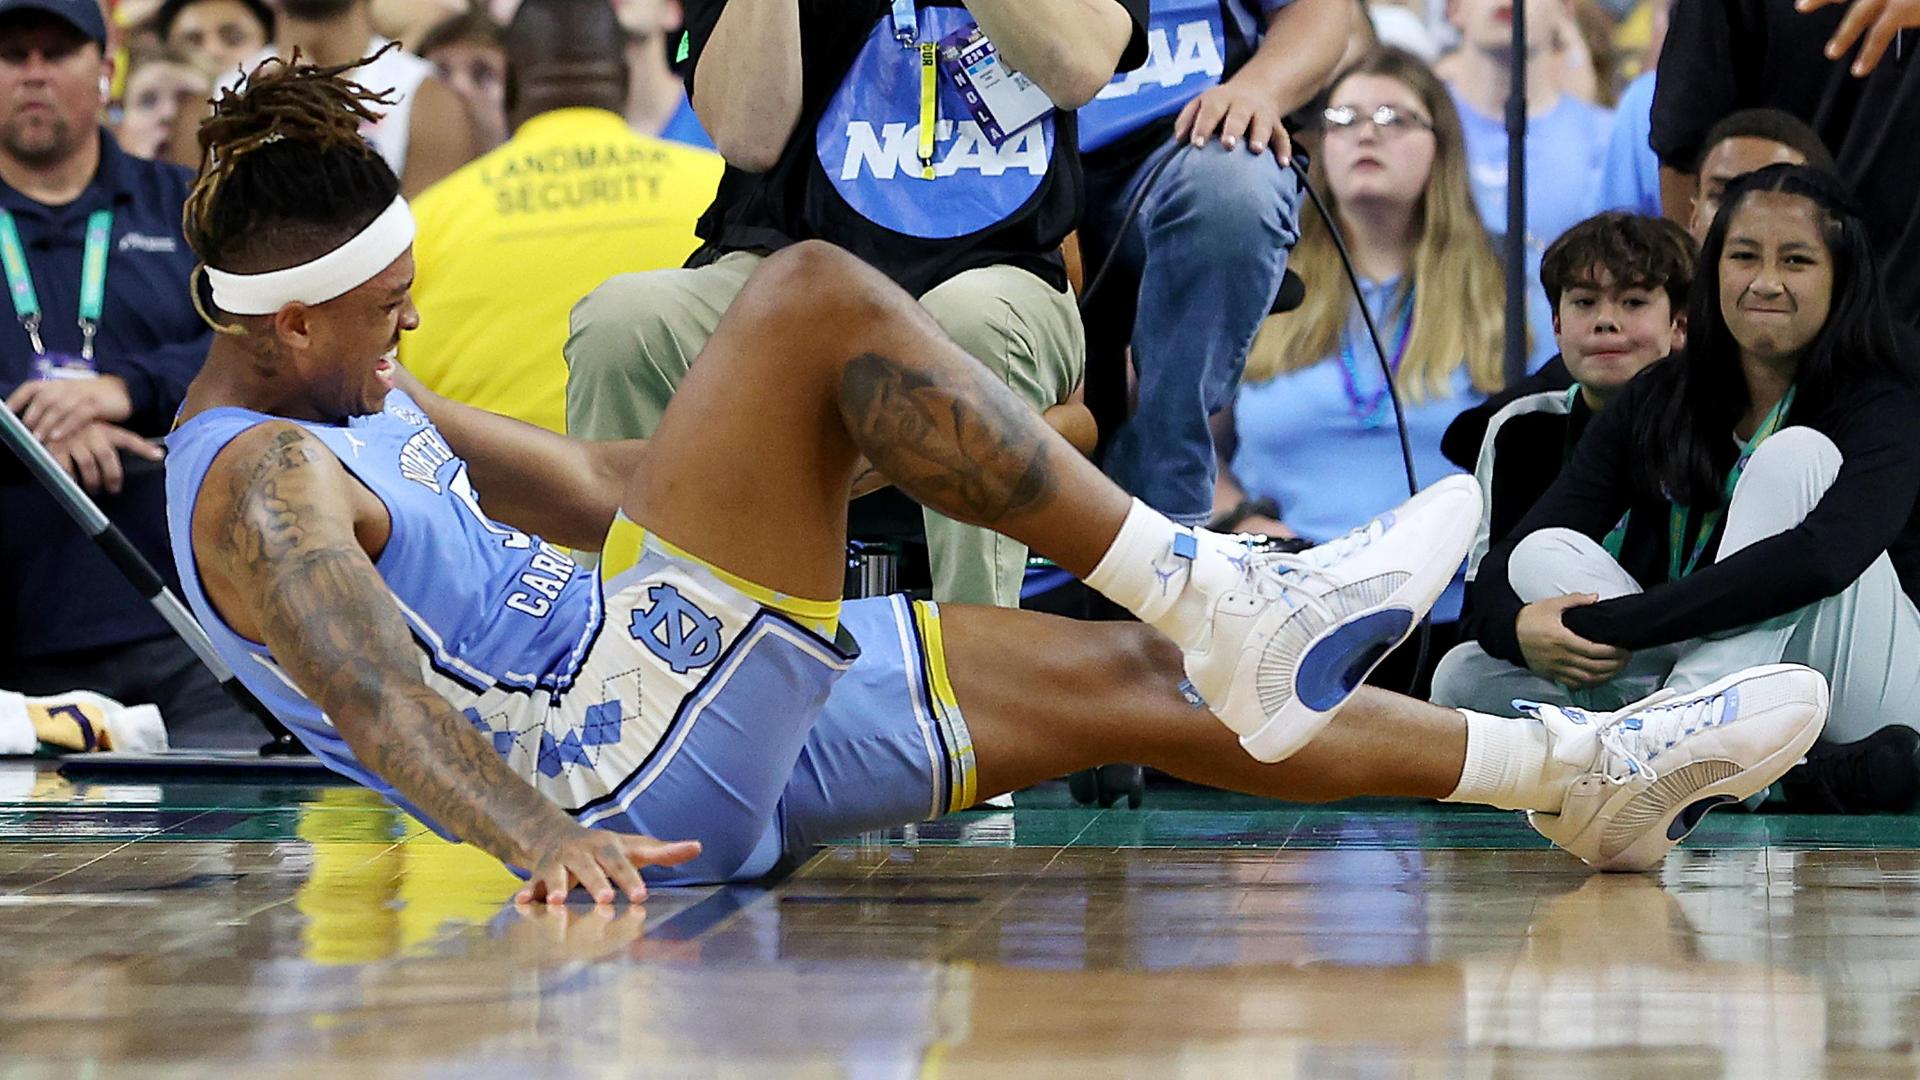 Bacot injures his ankle again in final minute of championship game